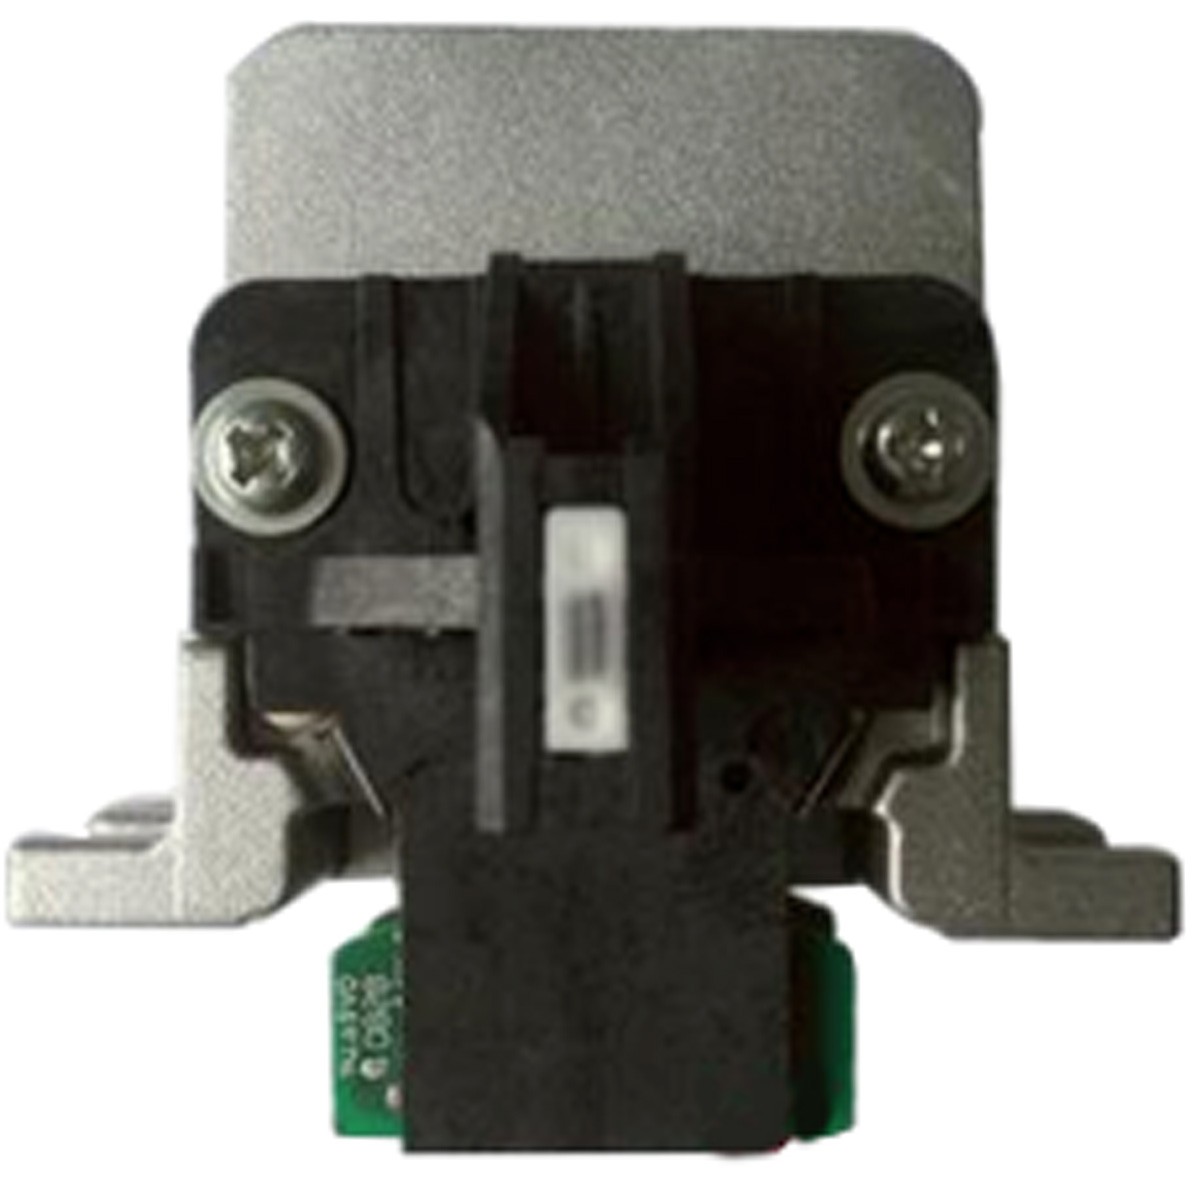 New compatible print head for Epson 1600K3H